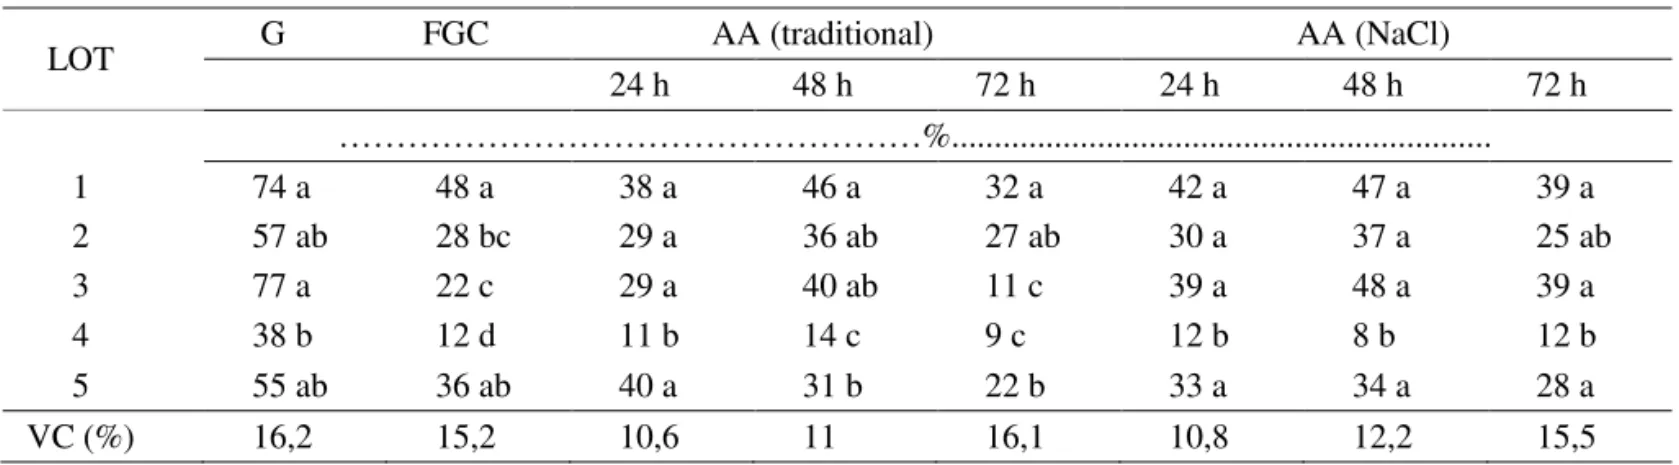 TABLE 2.   Results (%) of accelerated aging test (AA), using traditional and saturated solution of NaCl methods,  (G) germination (FGC) first germination count in five lots of Schinus terebinthifolius Raddi seeds.